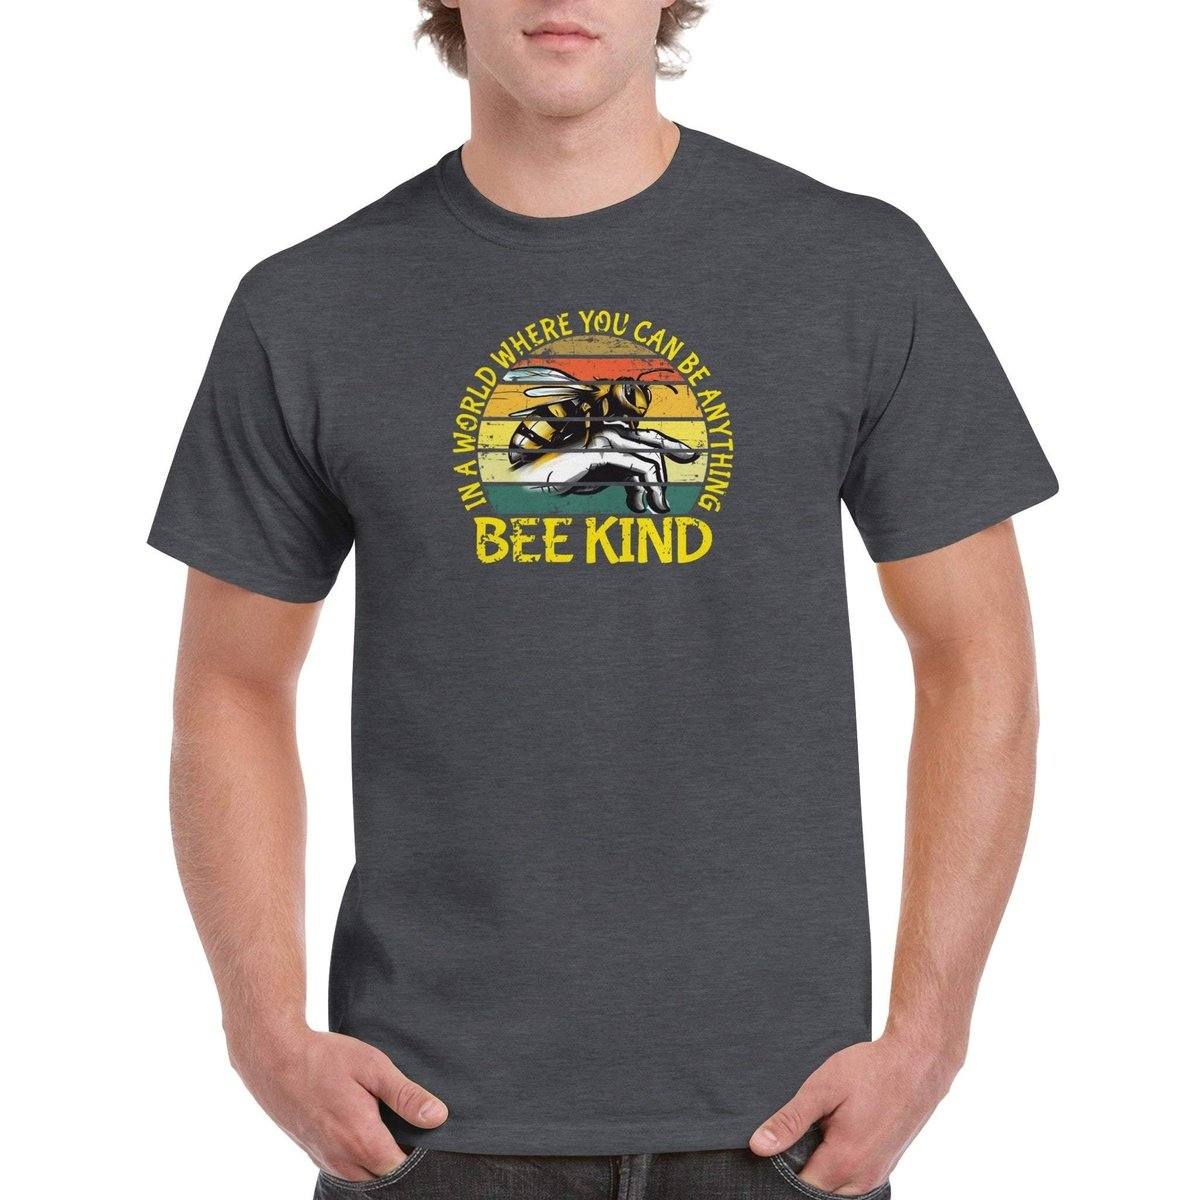 In a world where you can be anything bee kind Tshirt - Retro Vintage Bee - Unisex Crewneck T-shirt Australia Online Color Dark Heather / S